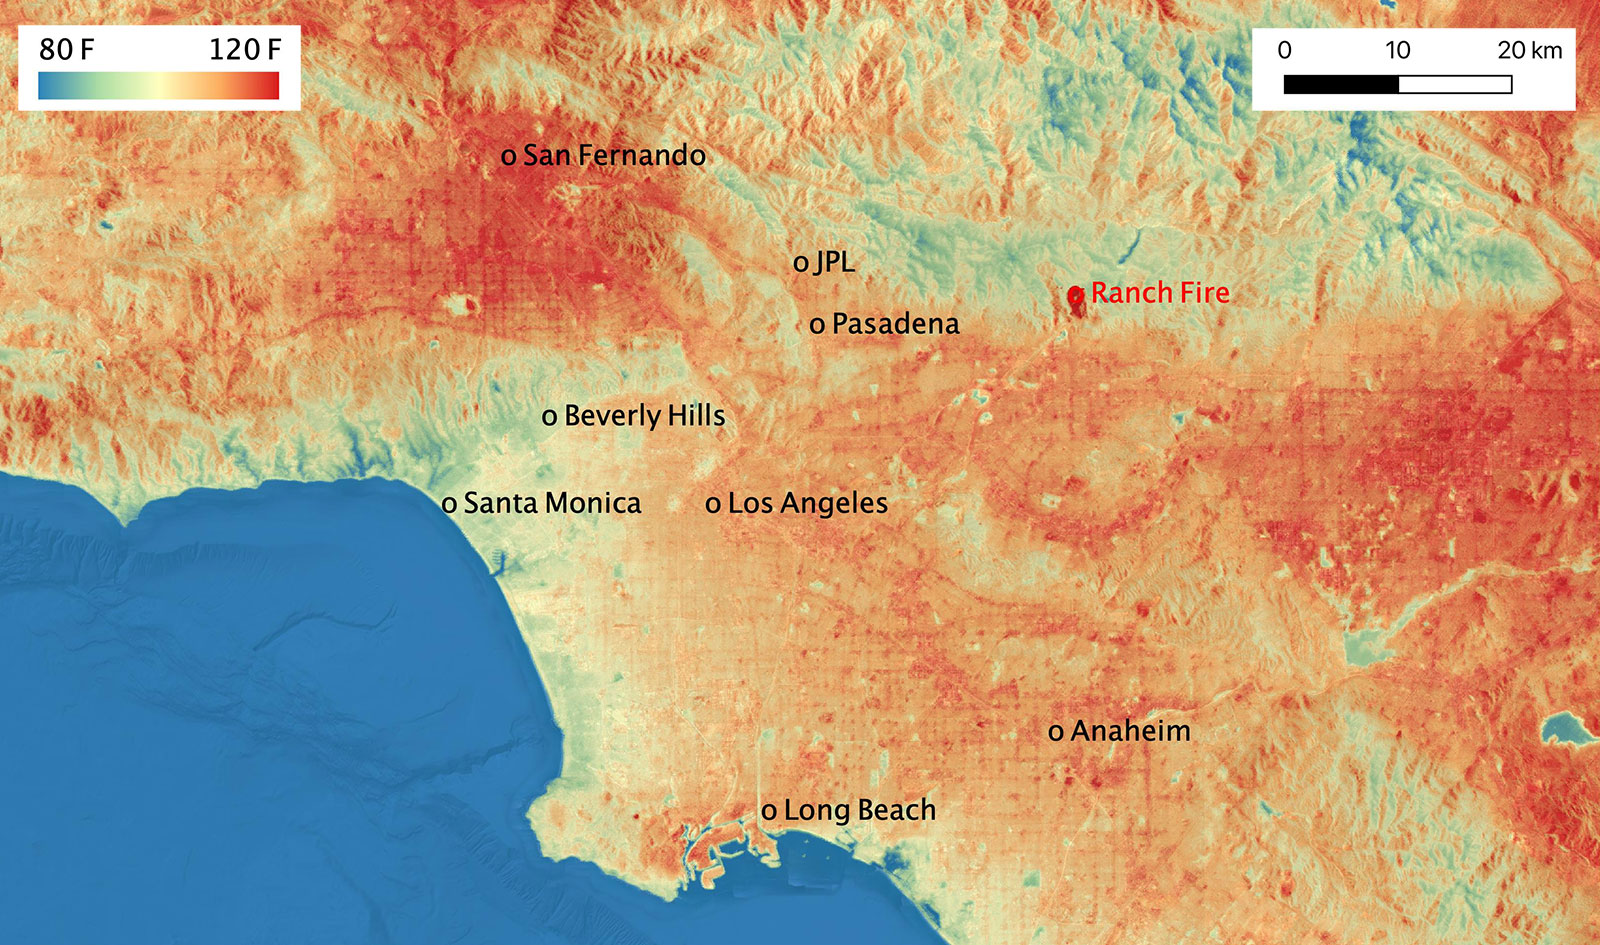 ECOSTRESS temperature map shows the land surface temperatures throughout Los Angeles County